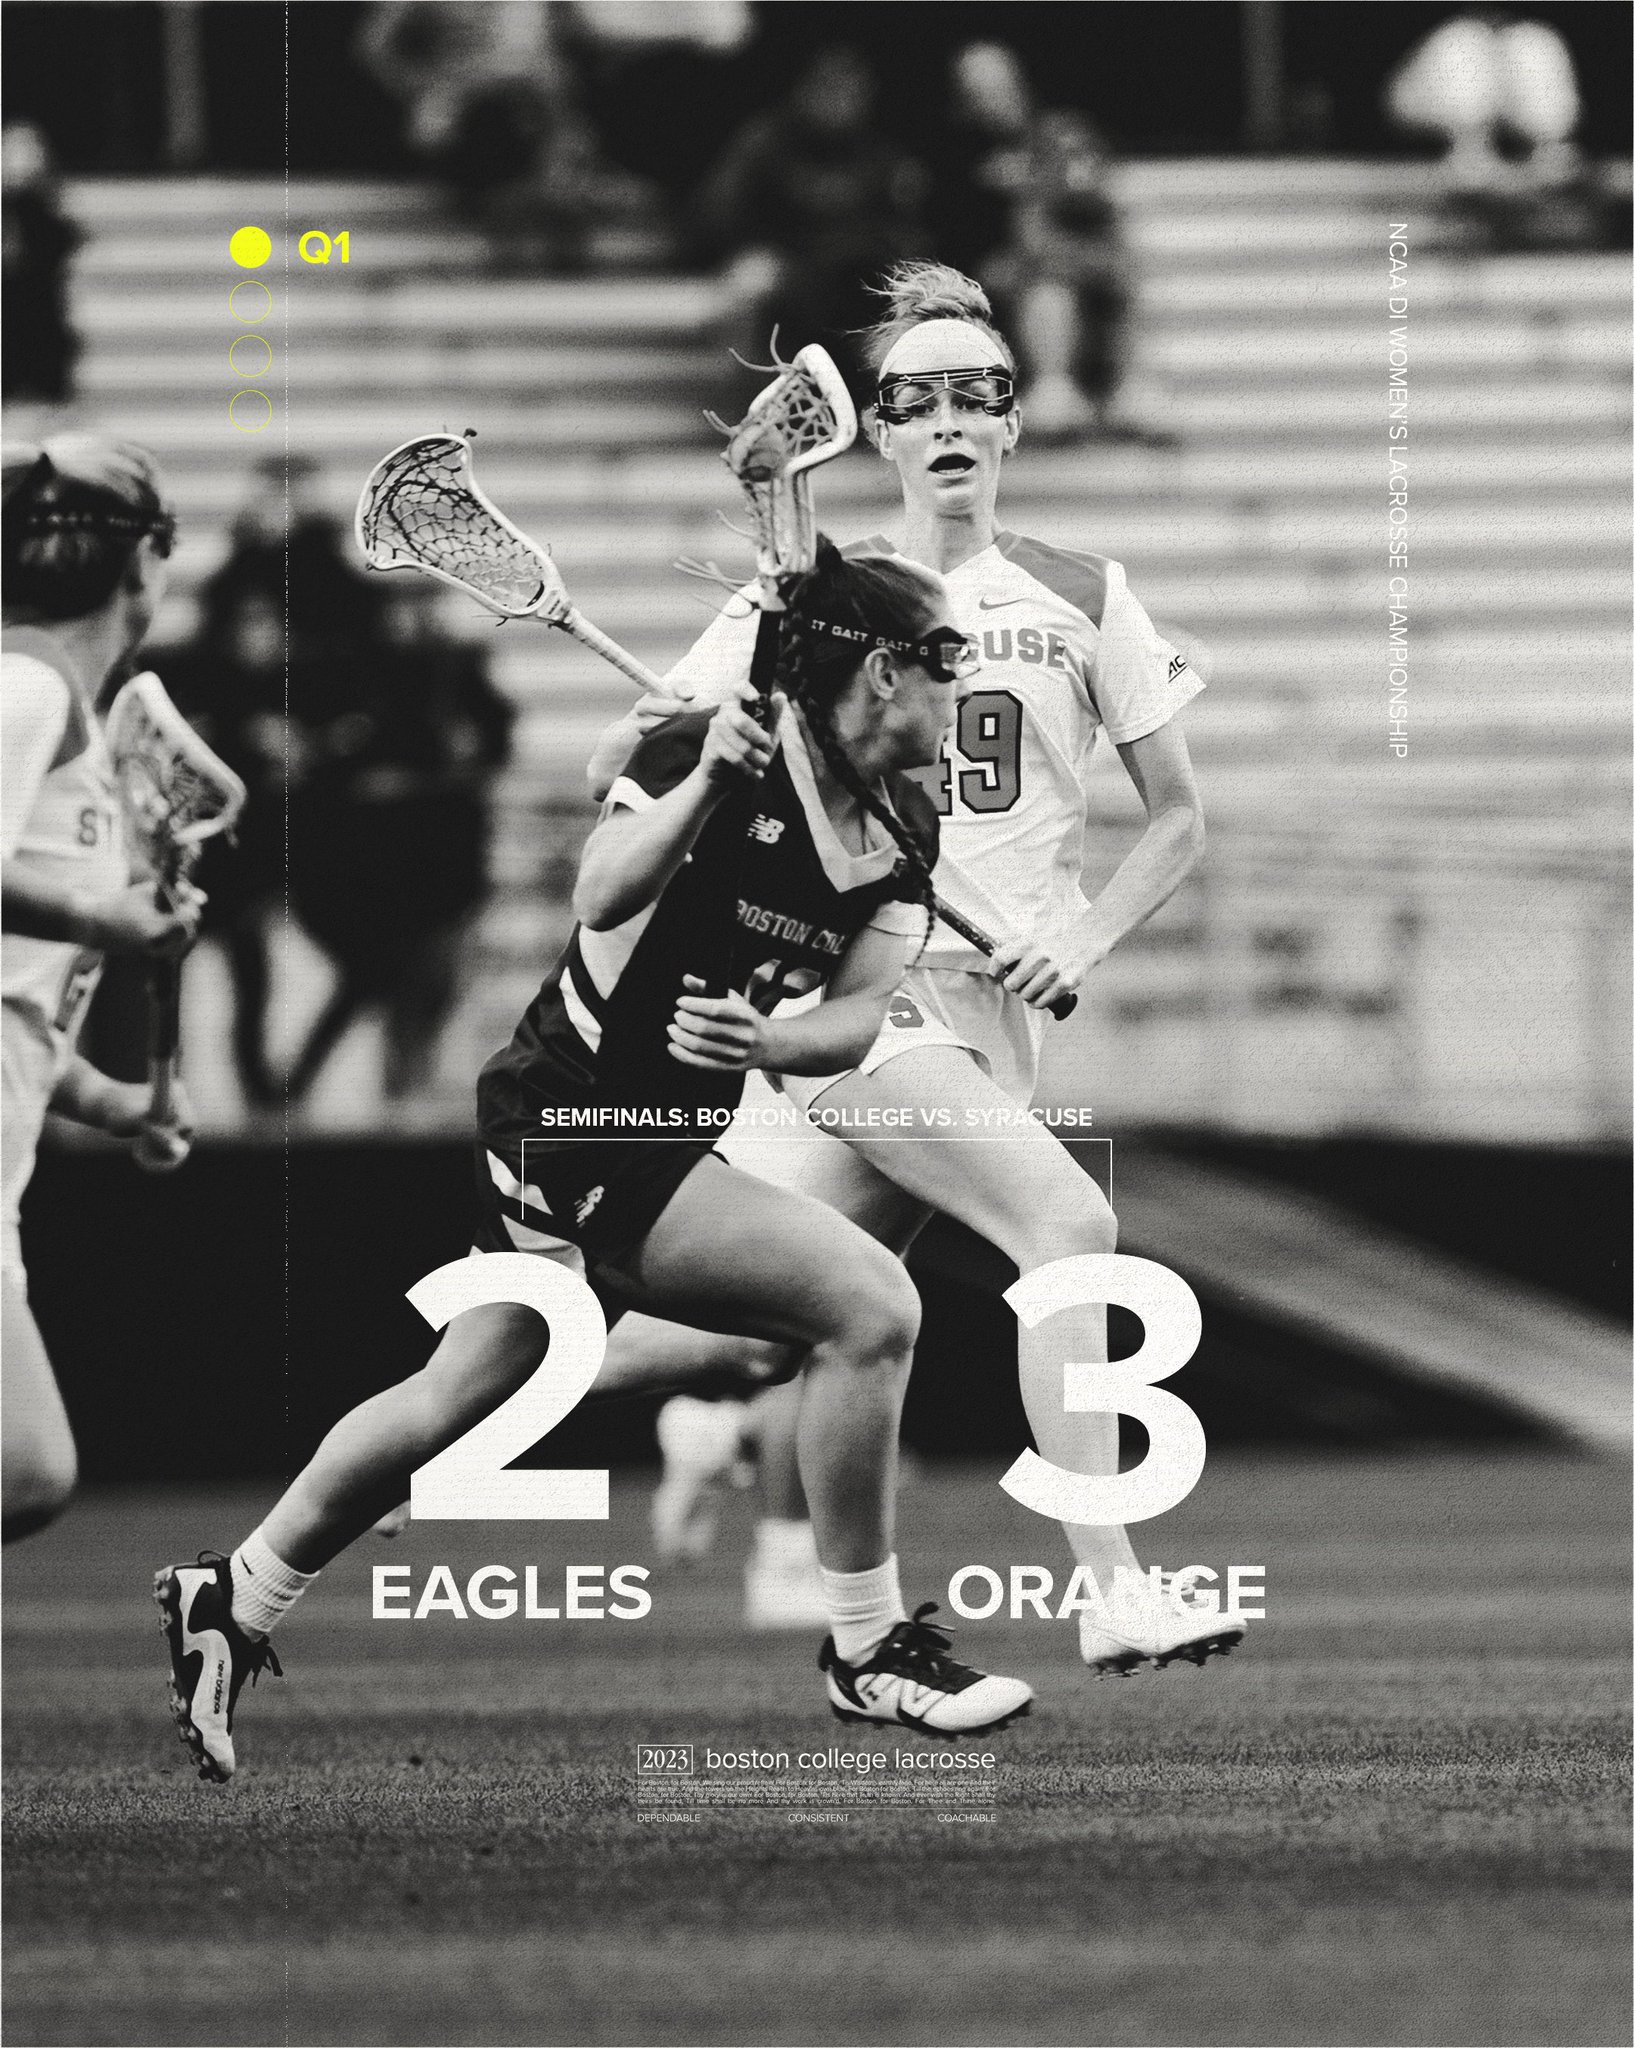 BC Women's Lacrosse on Twitter: "Your score after the first quarter.  https://t.co/y78Ue13Dqn" / X